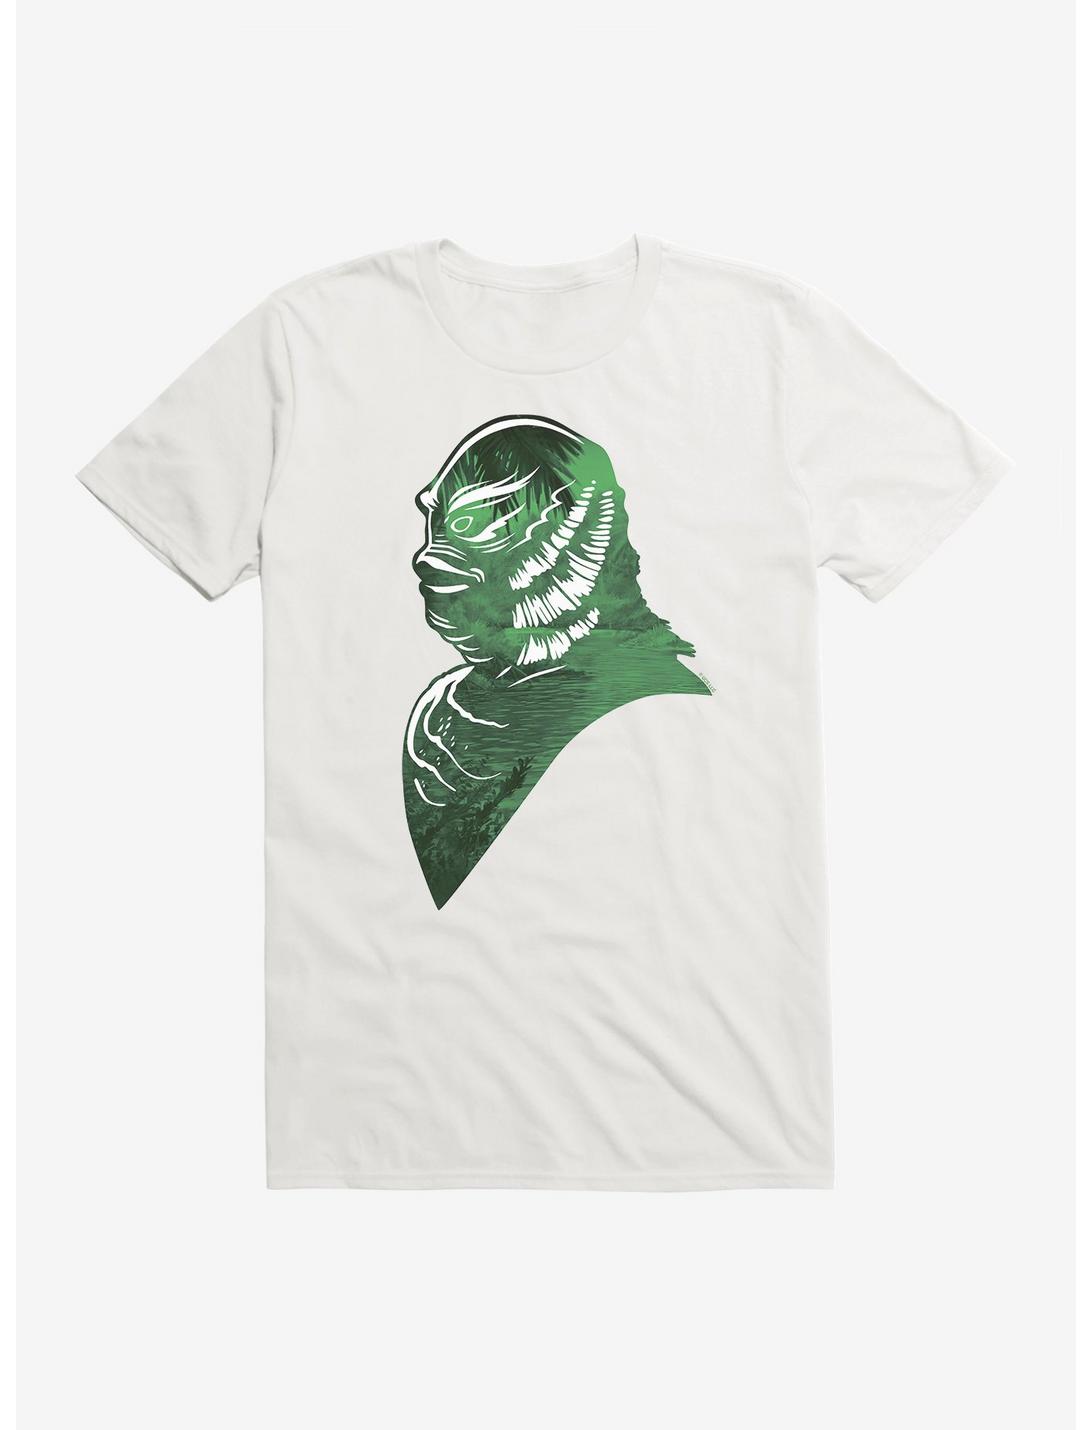 Universal Monsters Creature From The Black Lagoon Amazon Profile T-Shirt, WHITE, hi-res